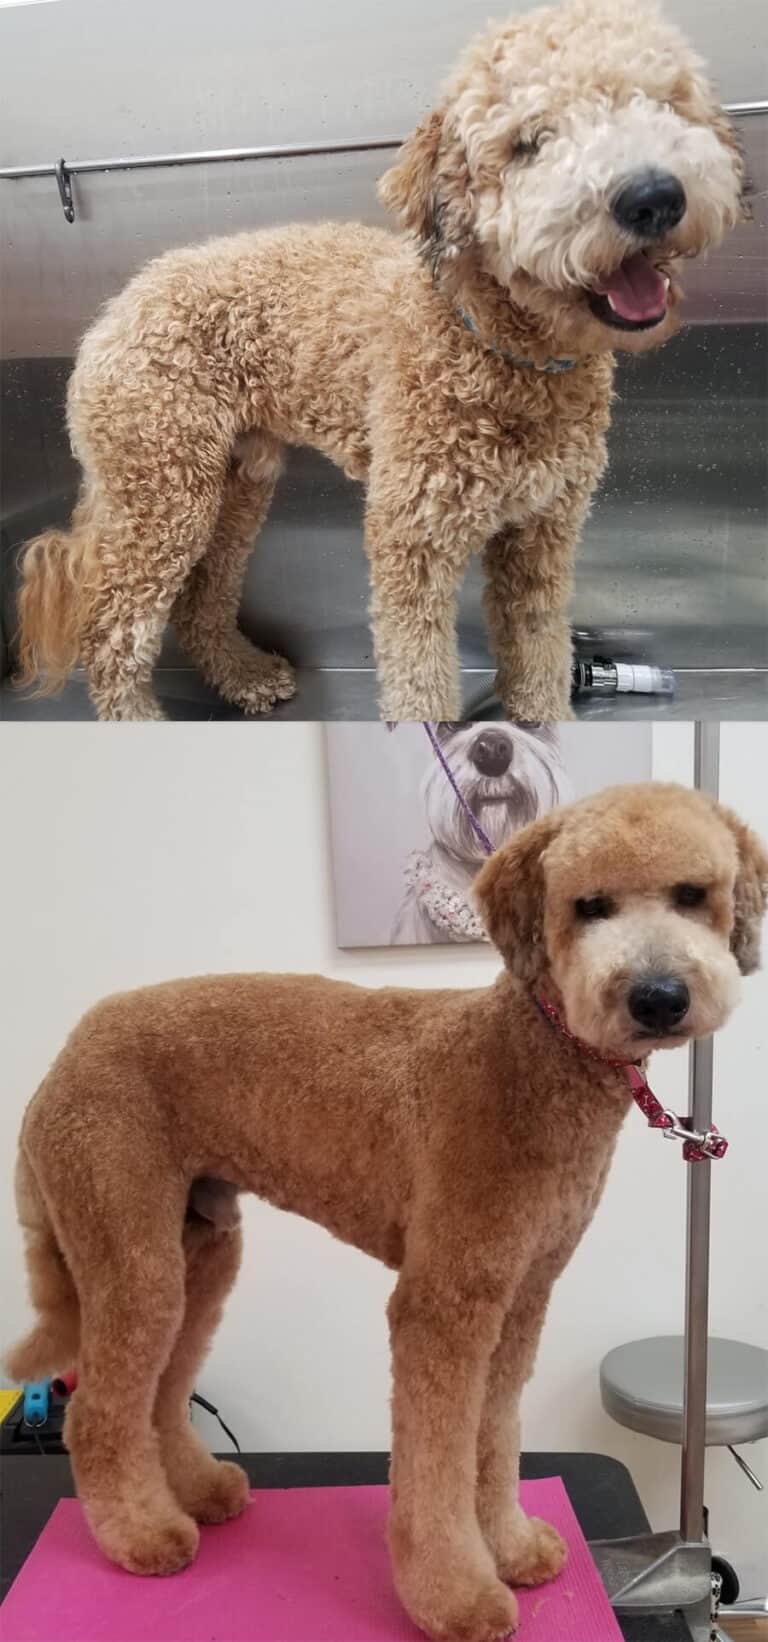 Dog before and after Full Dog Grooming at Toronto K9 Center